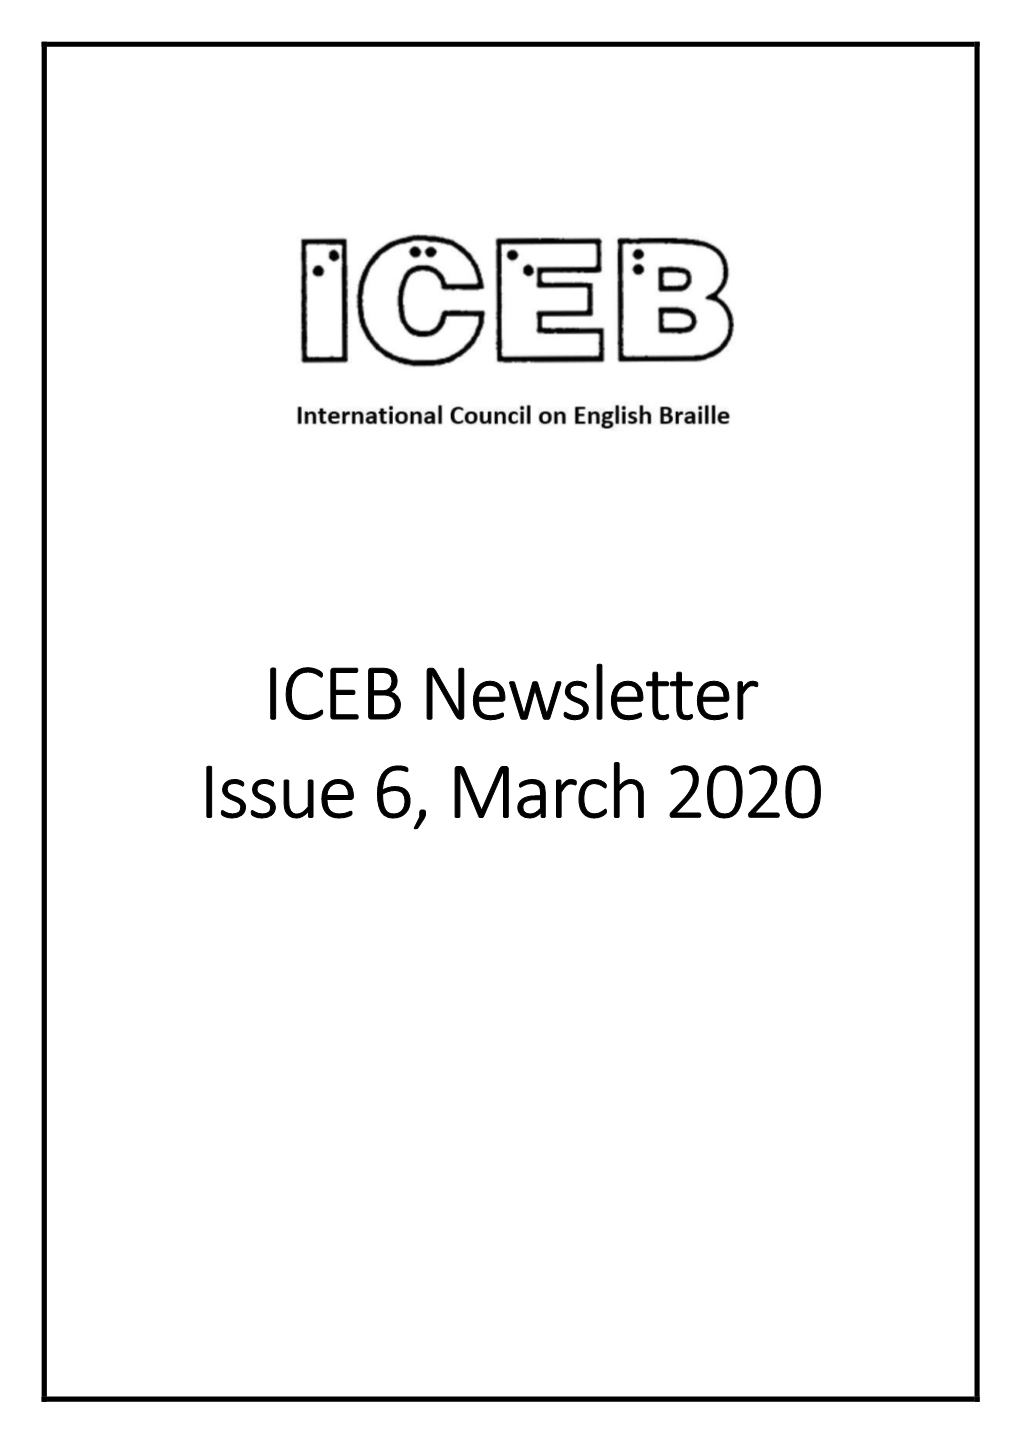 ICEB Newsletter Issue 6, March 2020